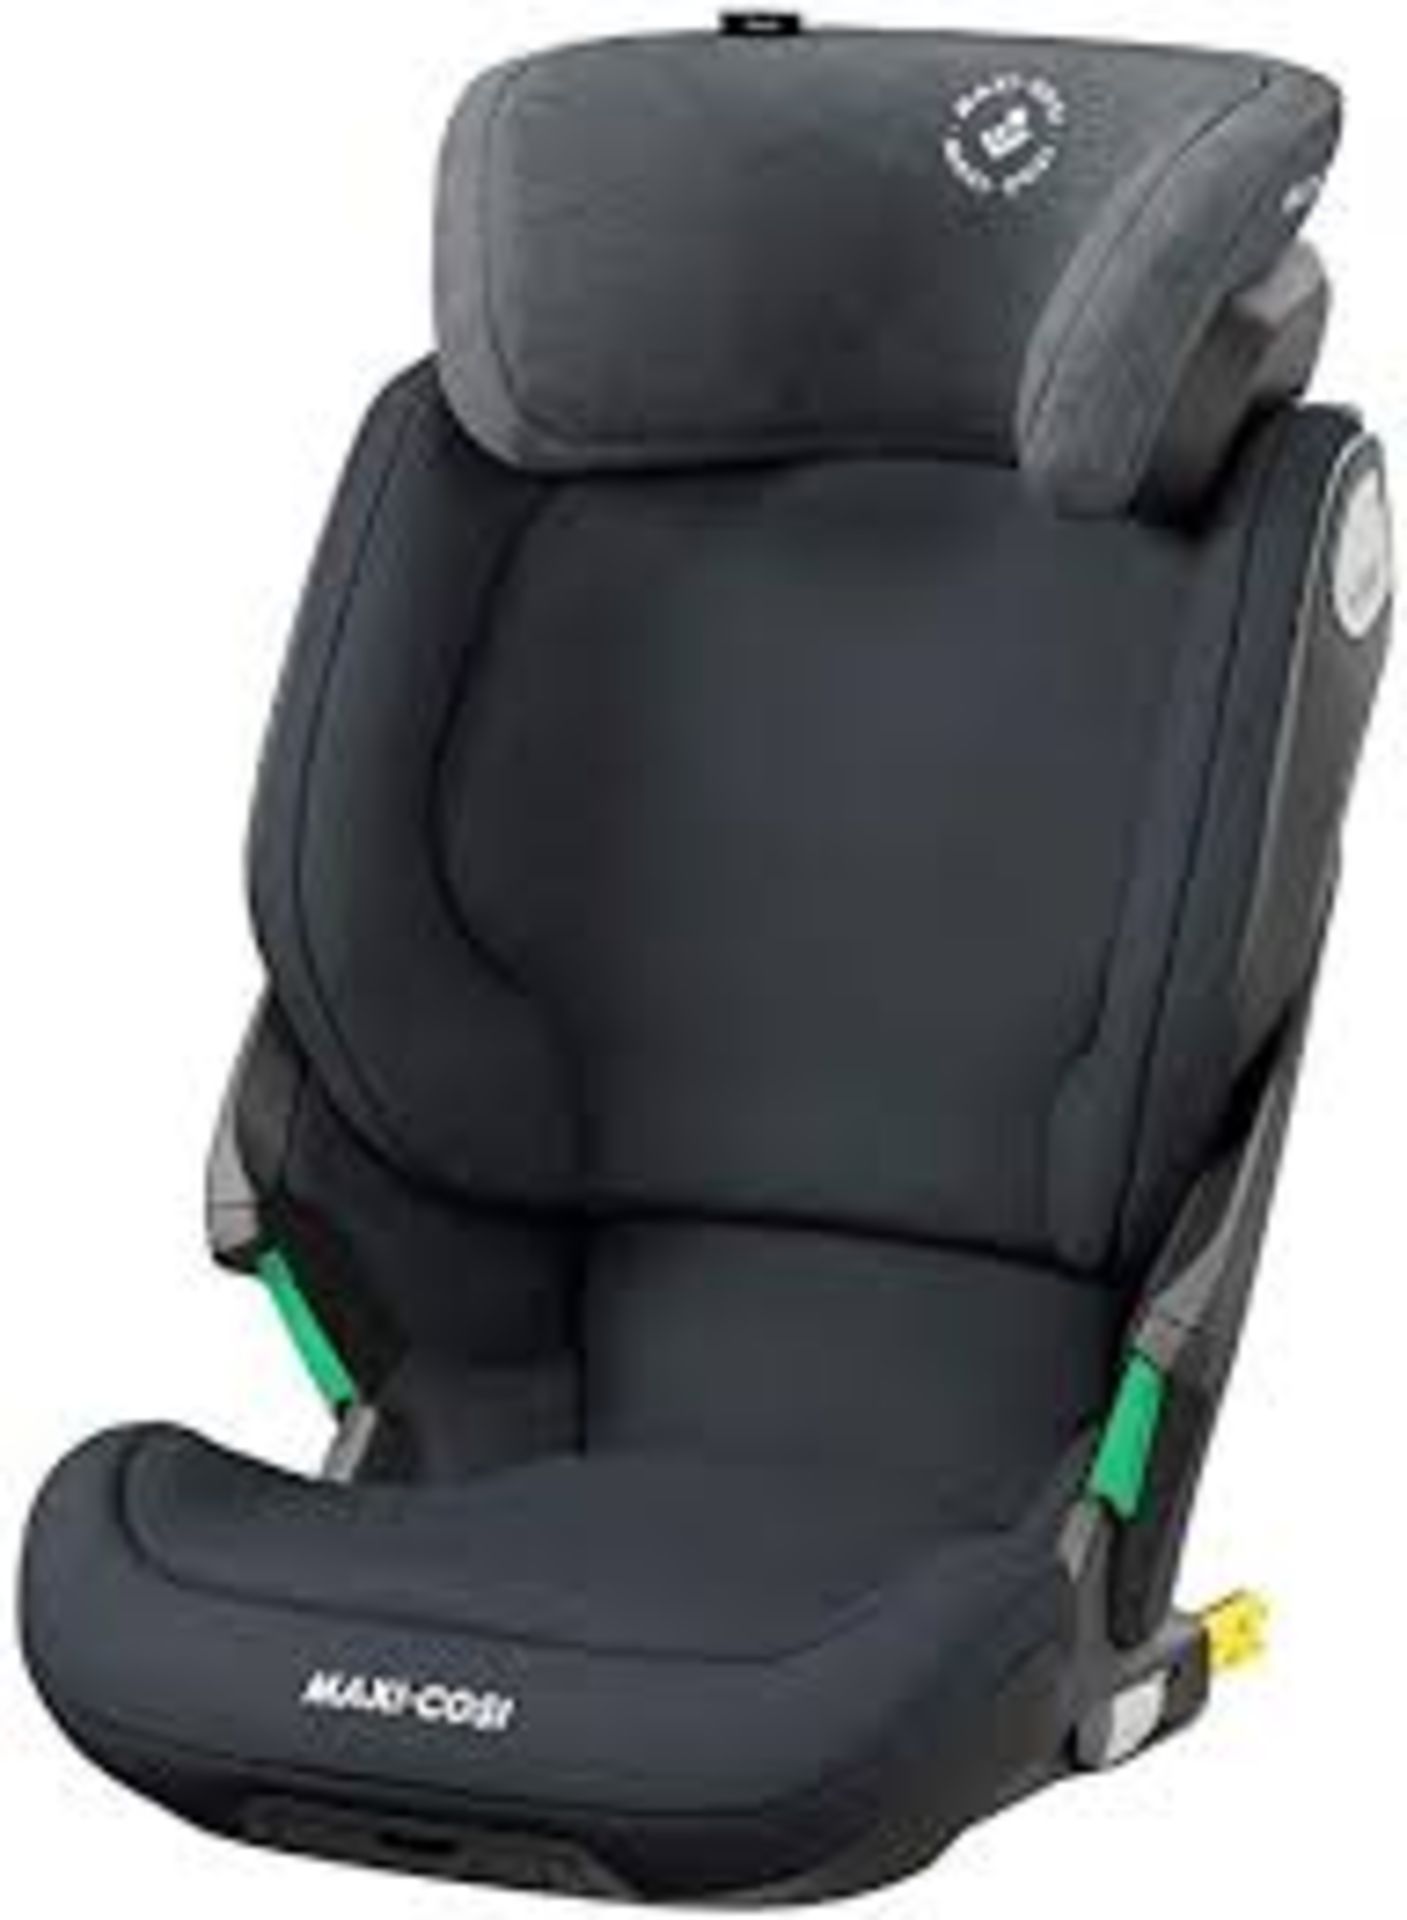 Boxed Maxi Cosi Core Isize Car Seat RRP £170 (NBW613362) (Pictures Are For Illustration Purposes